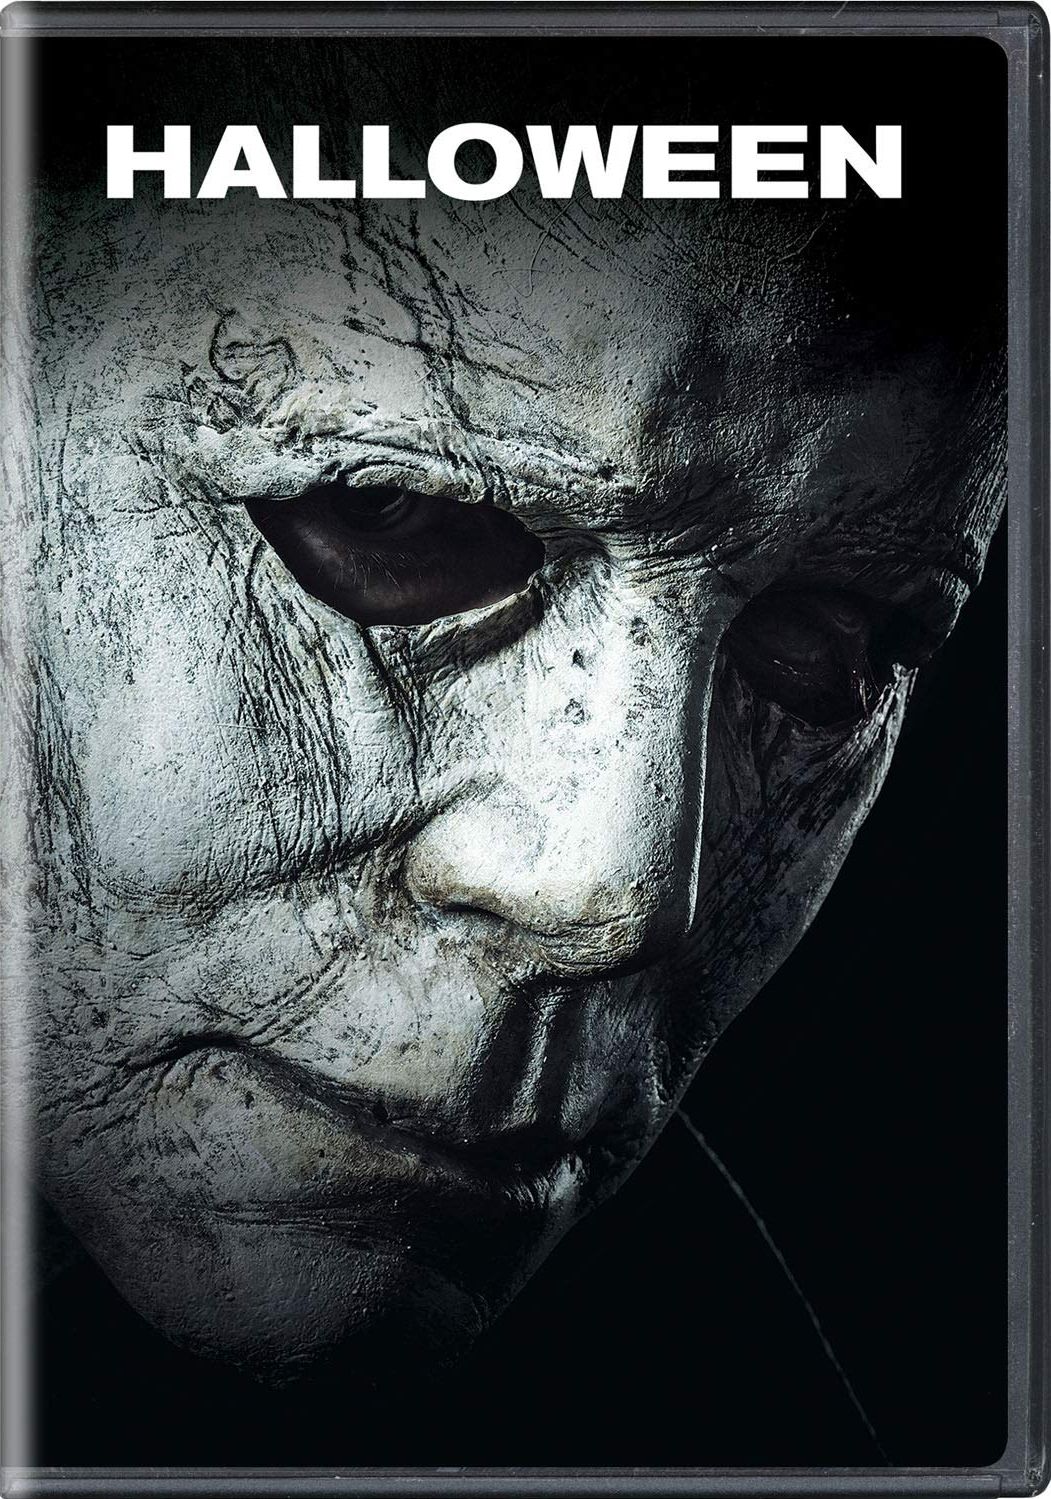 when is halloween 2020 coming out on dvd Halloween Dvd Release Date January 15 2019 when is halloween 2020 coming out on dvd